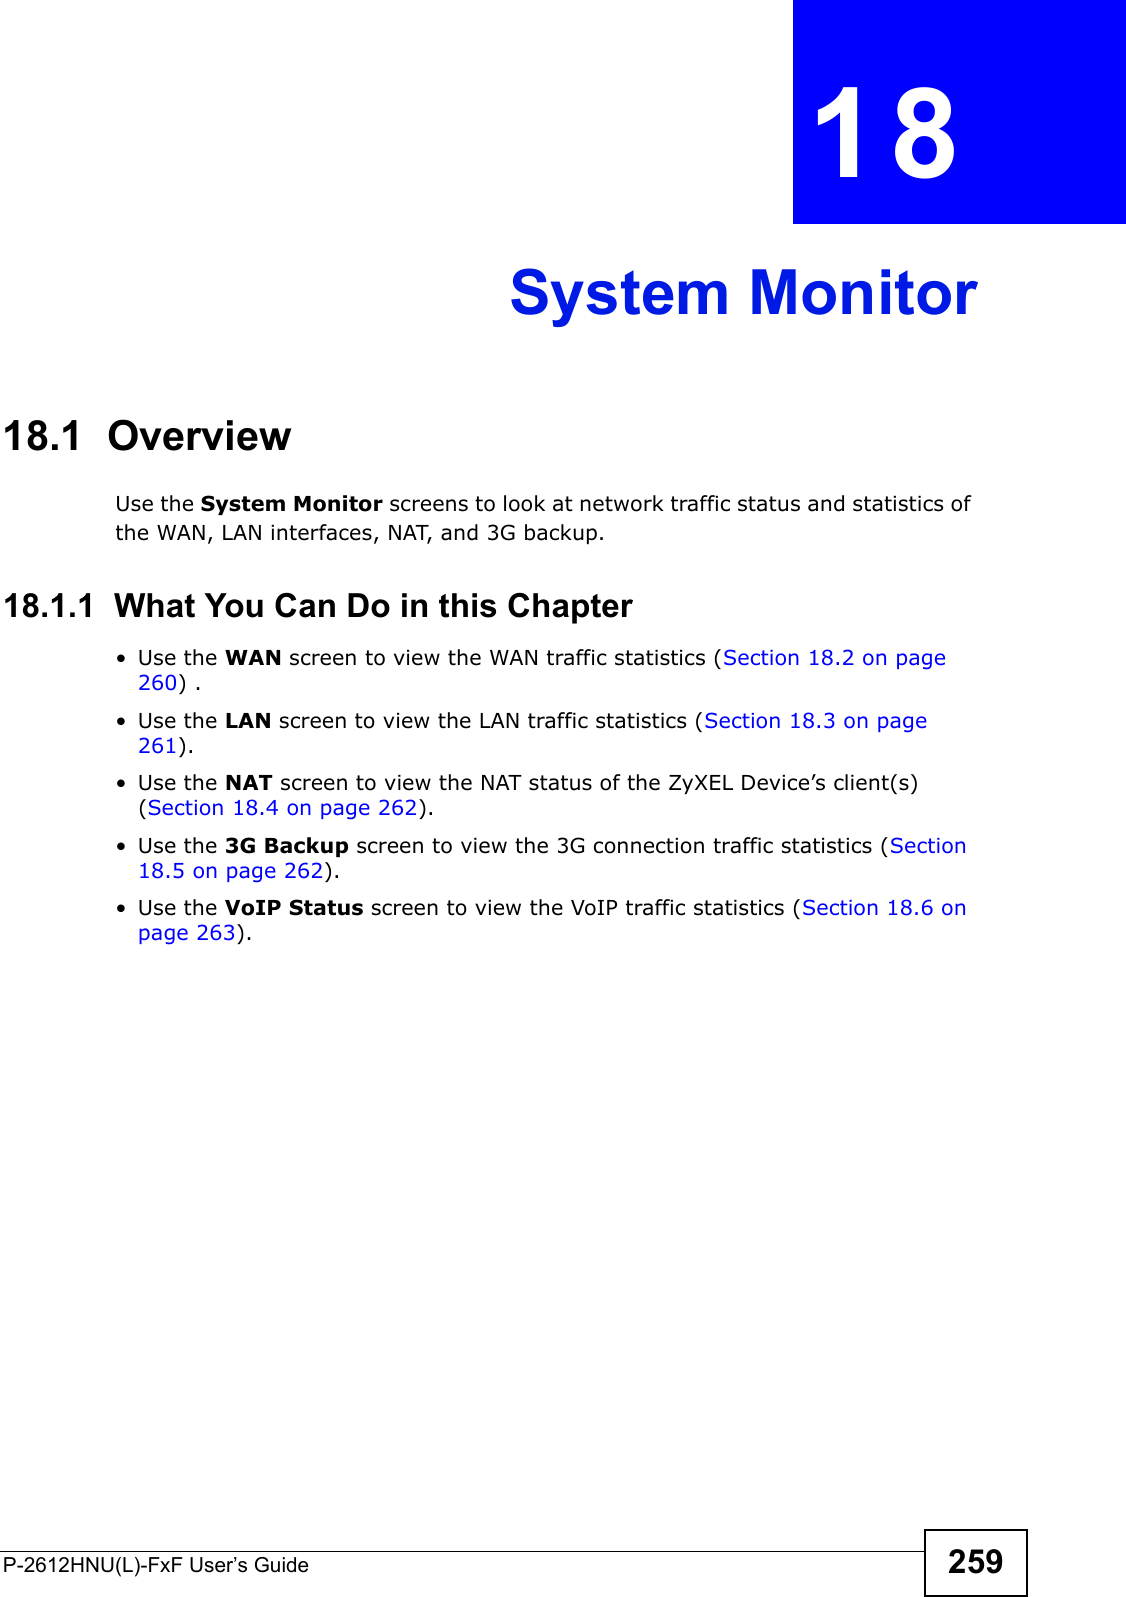 P-2612HNU(L)-FxF User’s Guide 259CHAPTER   18 System Monitor18.1  OverviewUse the System Monitor screens to look at network traffic status and statistics of the WAN, LAN interfaces, NAT, and 3G backup. 18.1.1  What You Can Do in this Chapter• Use the WAN screen to view the WAN traffic statistics (Section 18.2 on page 260) .• Use the LAN screen to view the LAN traffic statistics (Section 18.3 on page 261).• Use the NAT screen to view the NAT status of the ZyXEL Device’s client(s) (Section 18.4 on page 262).• Use the 3G Backup screen to view the 3G connection traffic statistics (Section 18.5 on page 262).• Use the VoIP Status screen to view the VoIP traffic statistics (Section 18.6 on page 263).